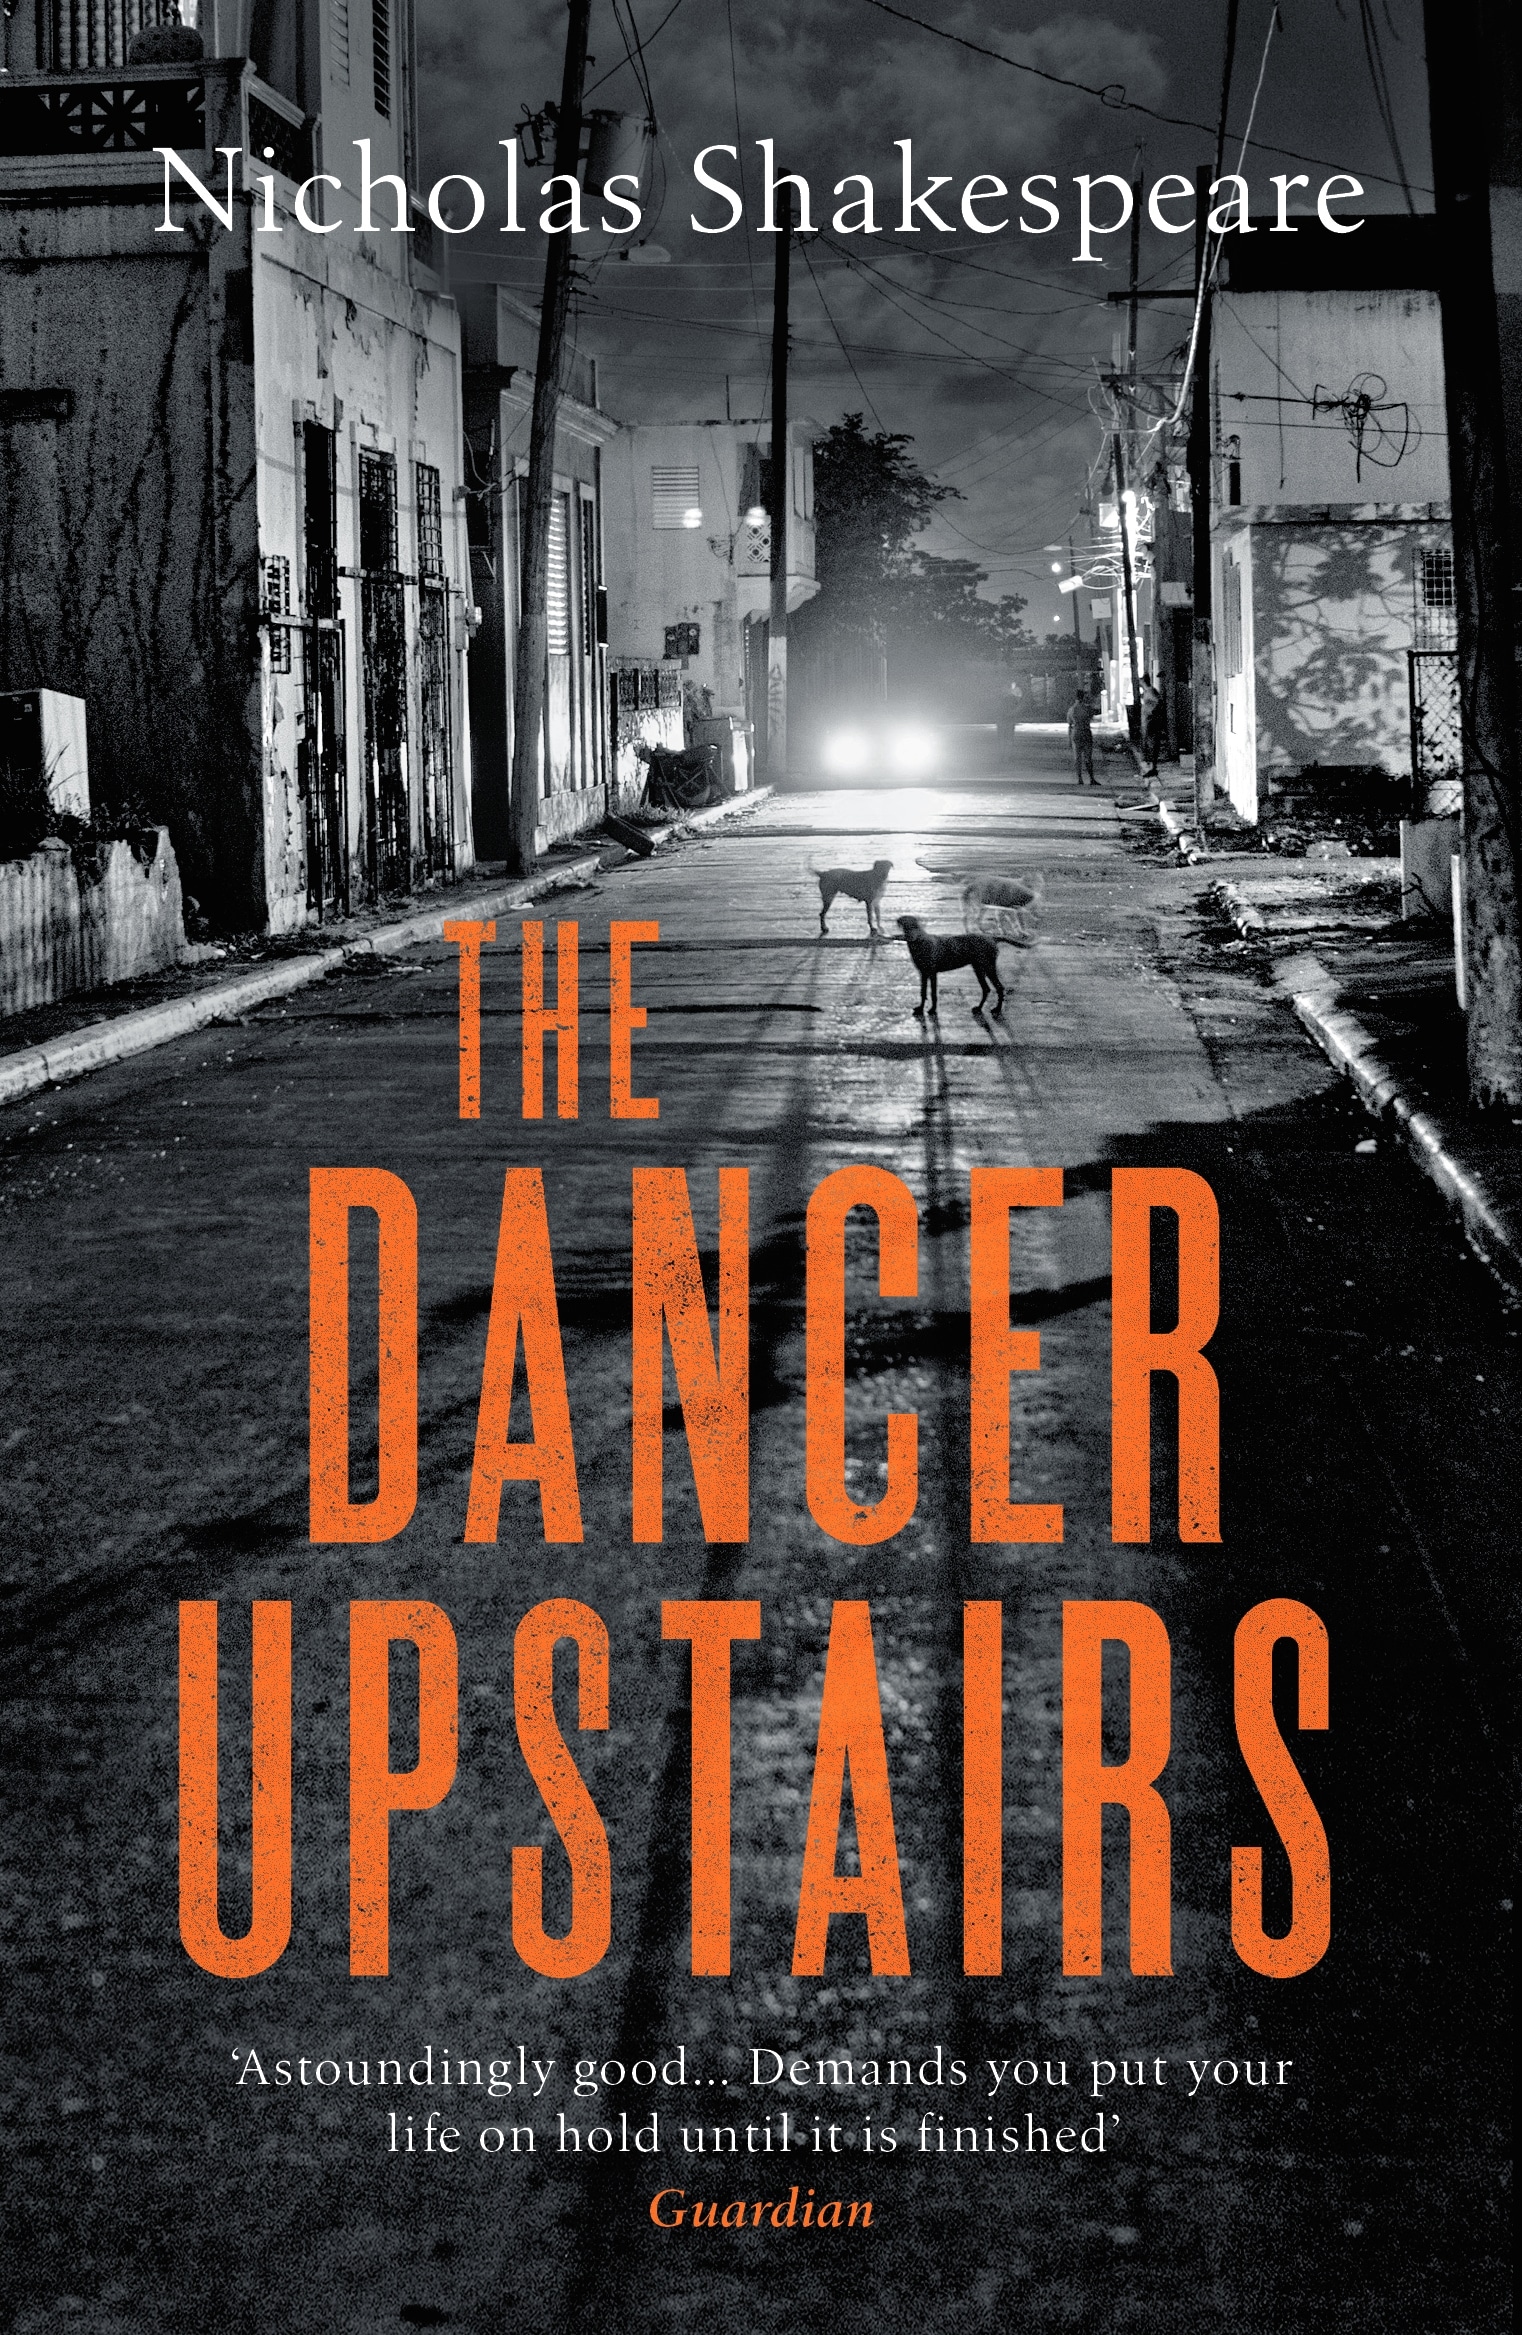 Book “The Dancer Upstairs” by Nicholas Shakespeare — July 8, 2021